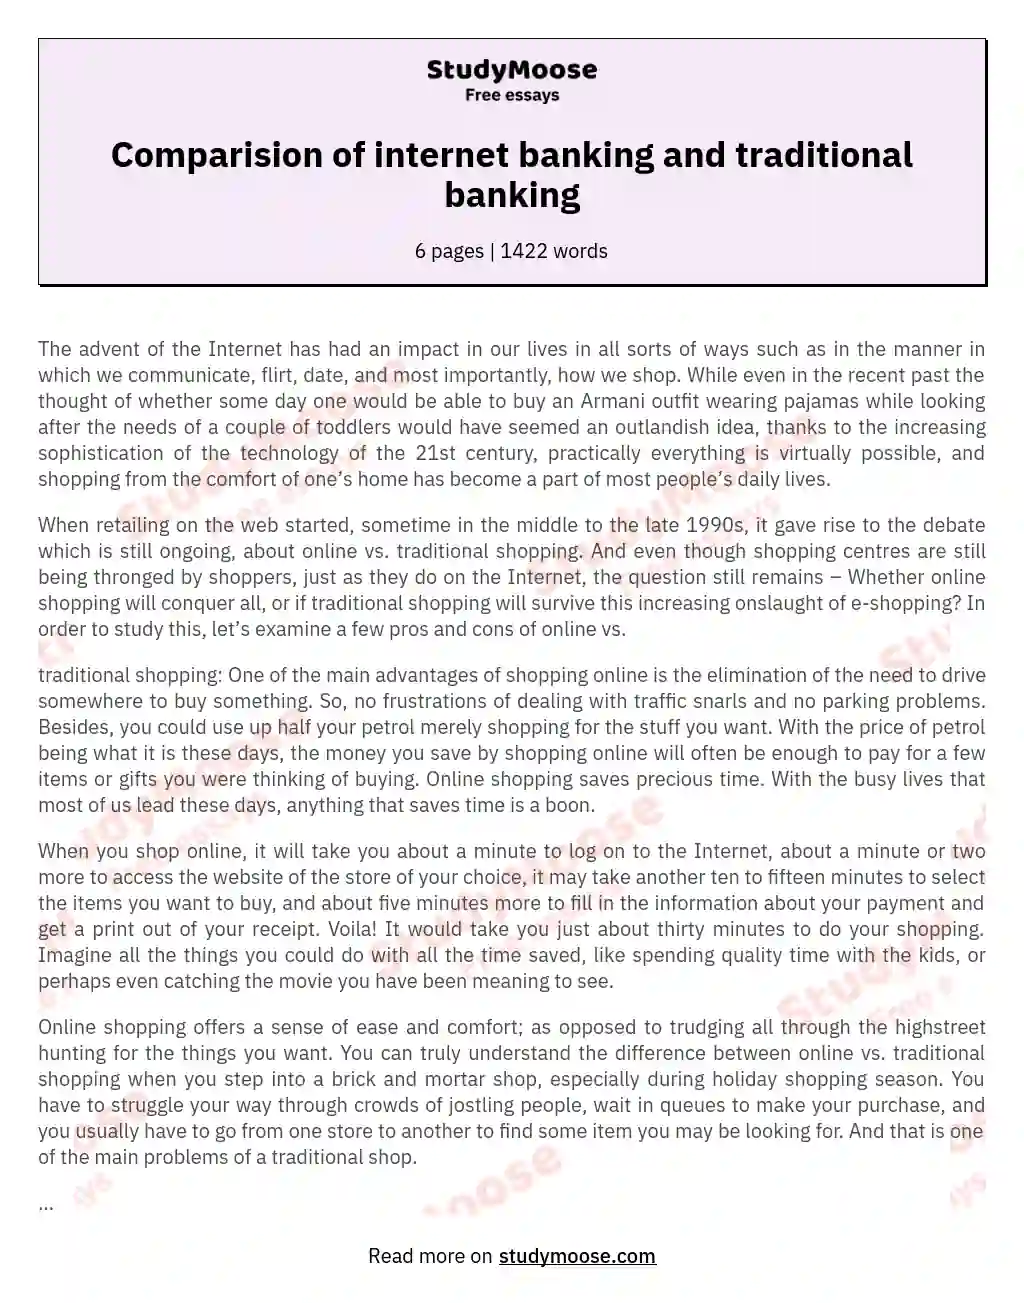 Comparision of internet banking and traditional banking